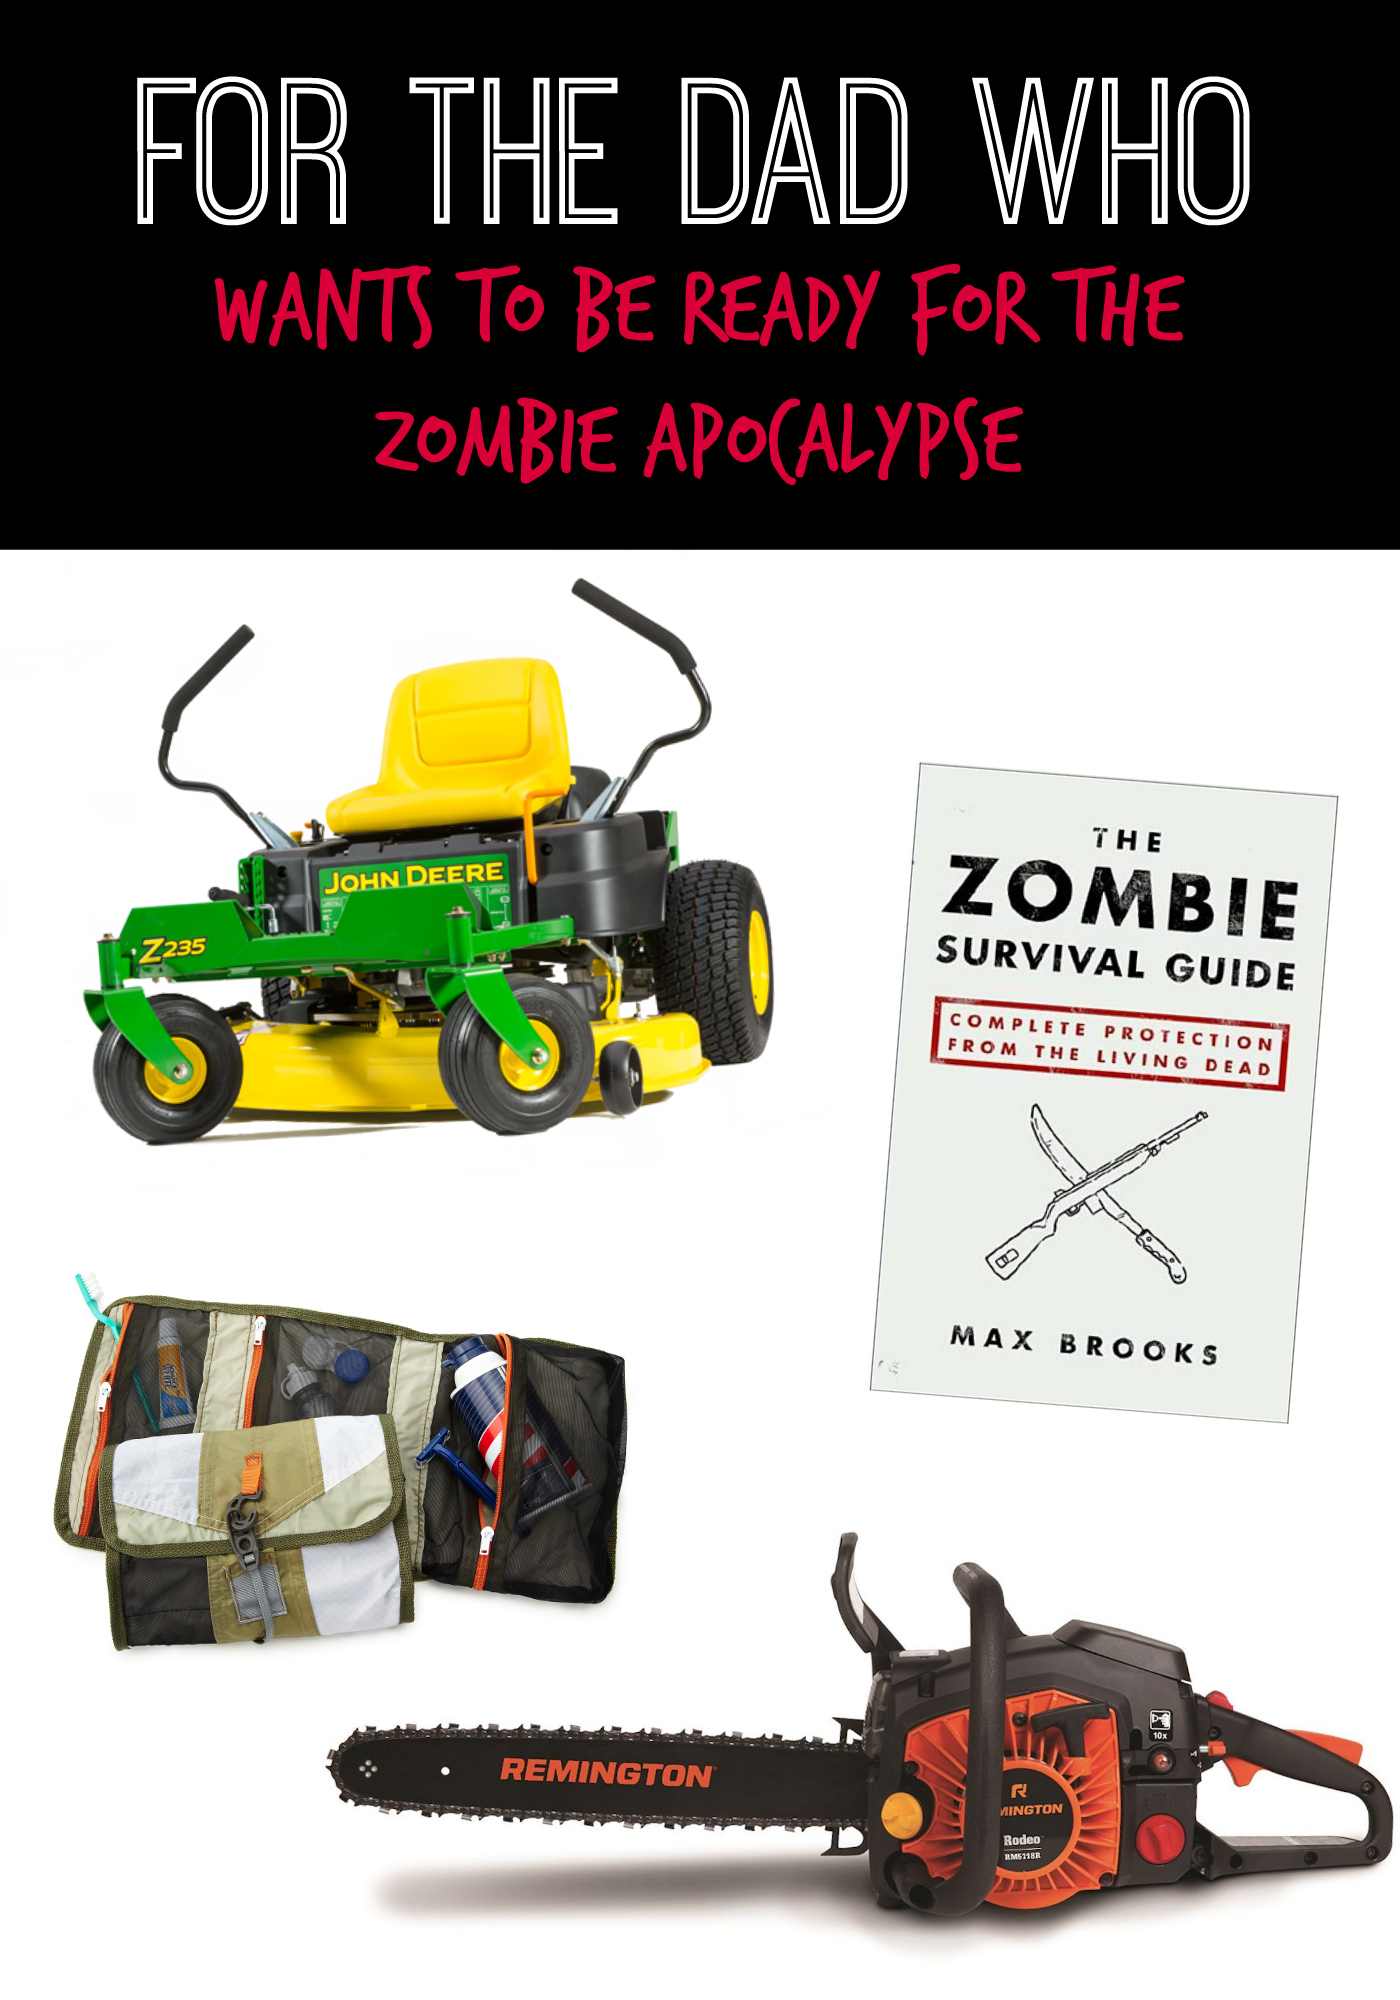 For the Dad who wants to be Ready for the Zombie Apocalypse